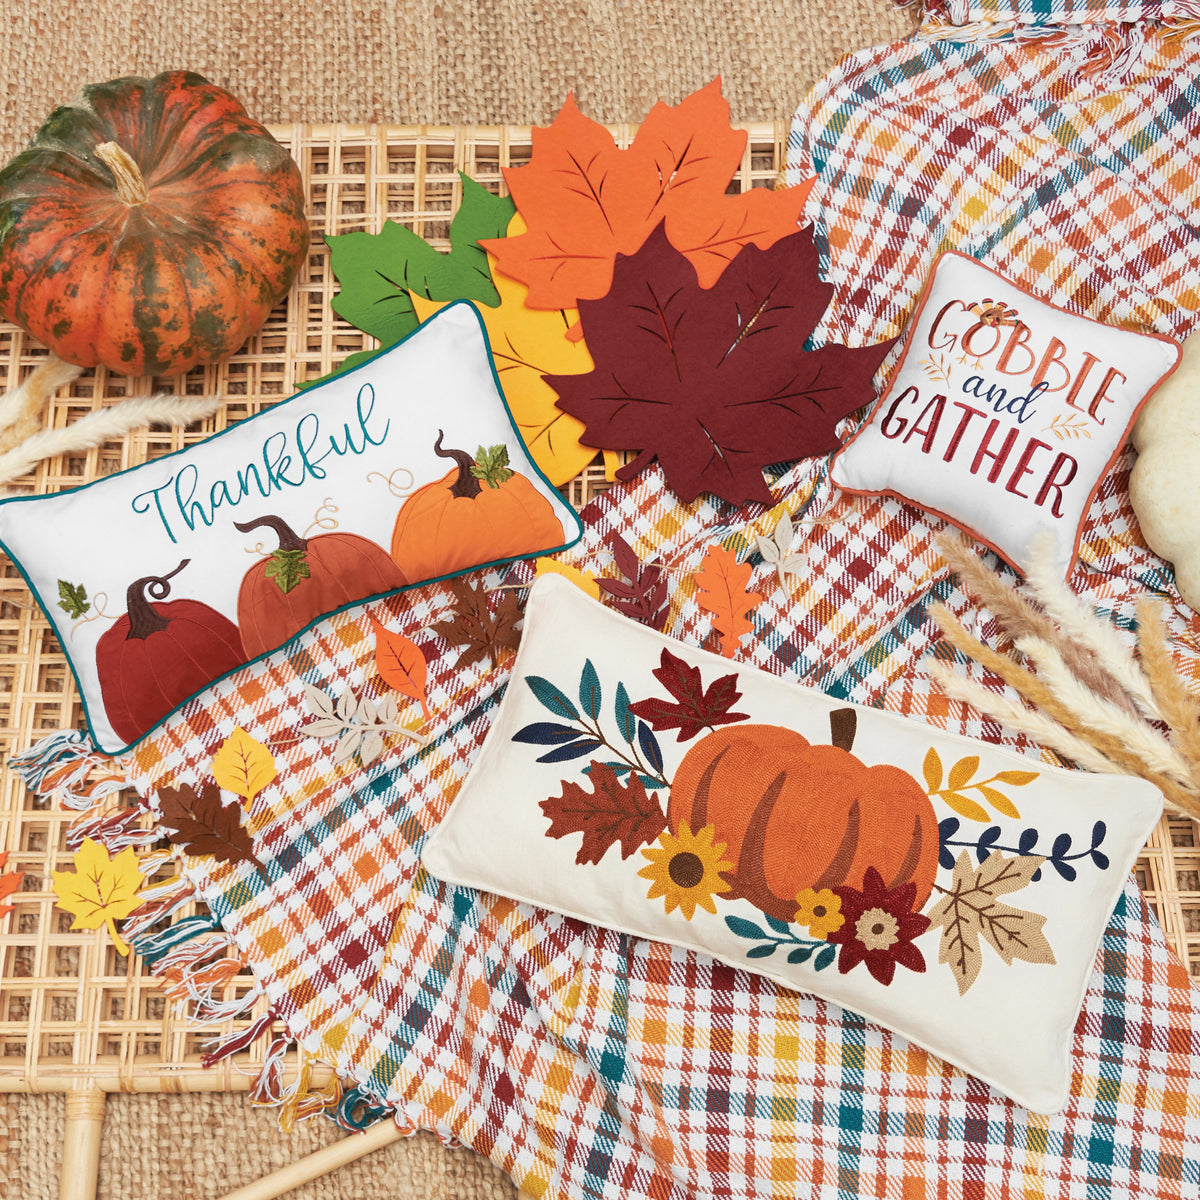 Harvest flat lay of embellished pumpkin pillows.